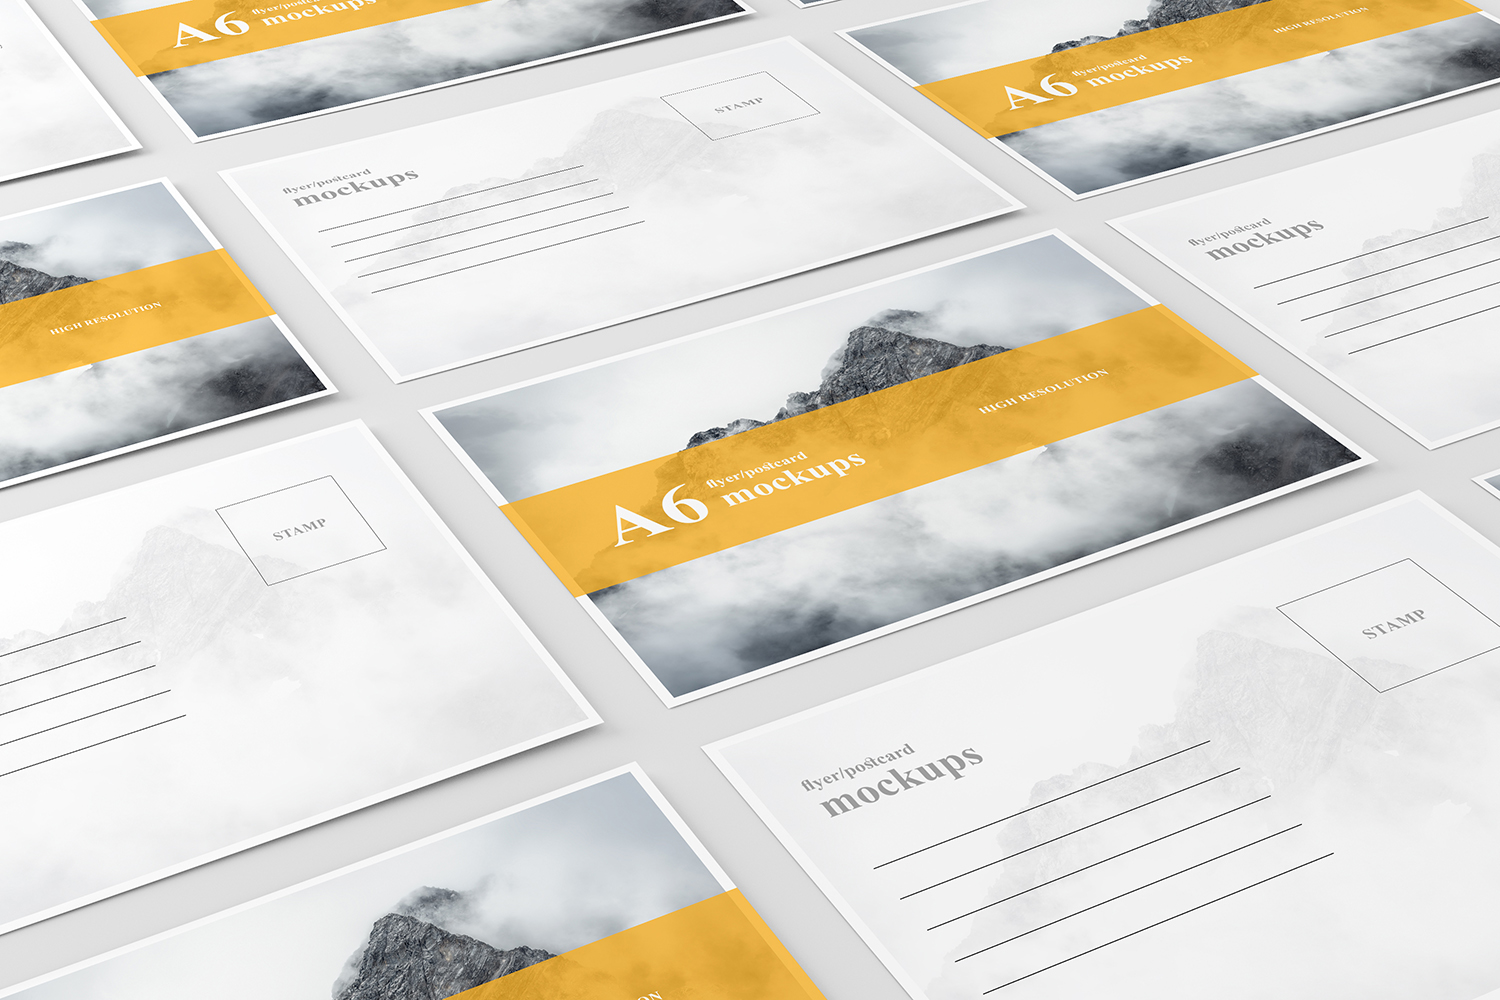 A6 Flyer / Postcard Mock-Up by ToaSin Studio on Dribbble